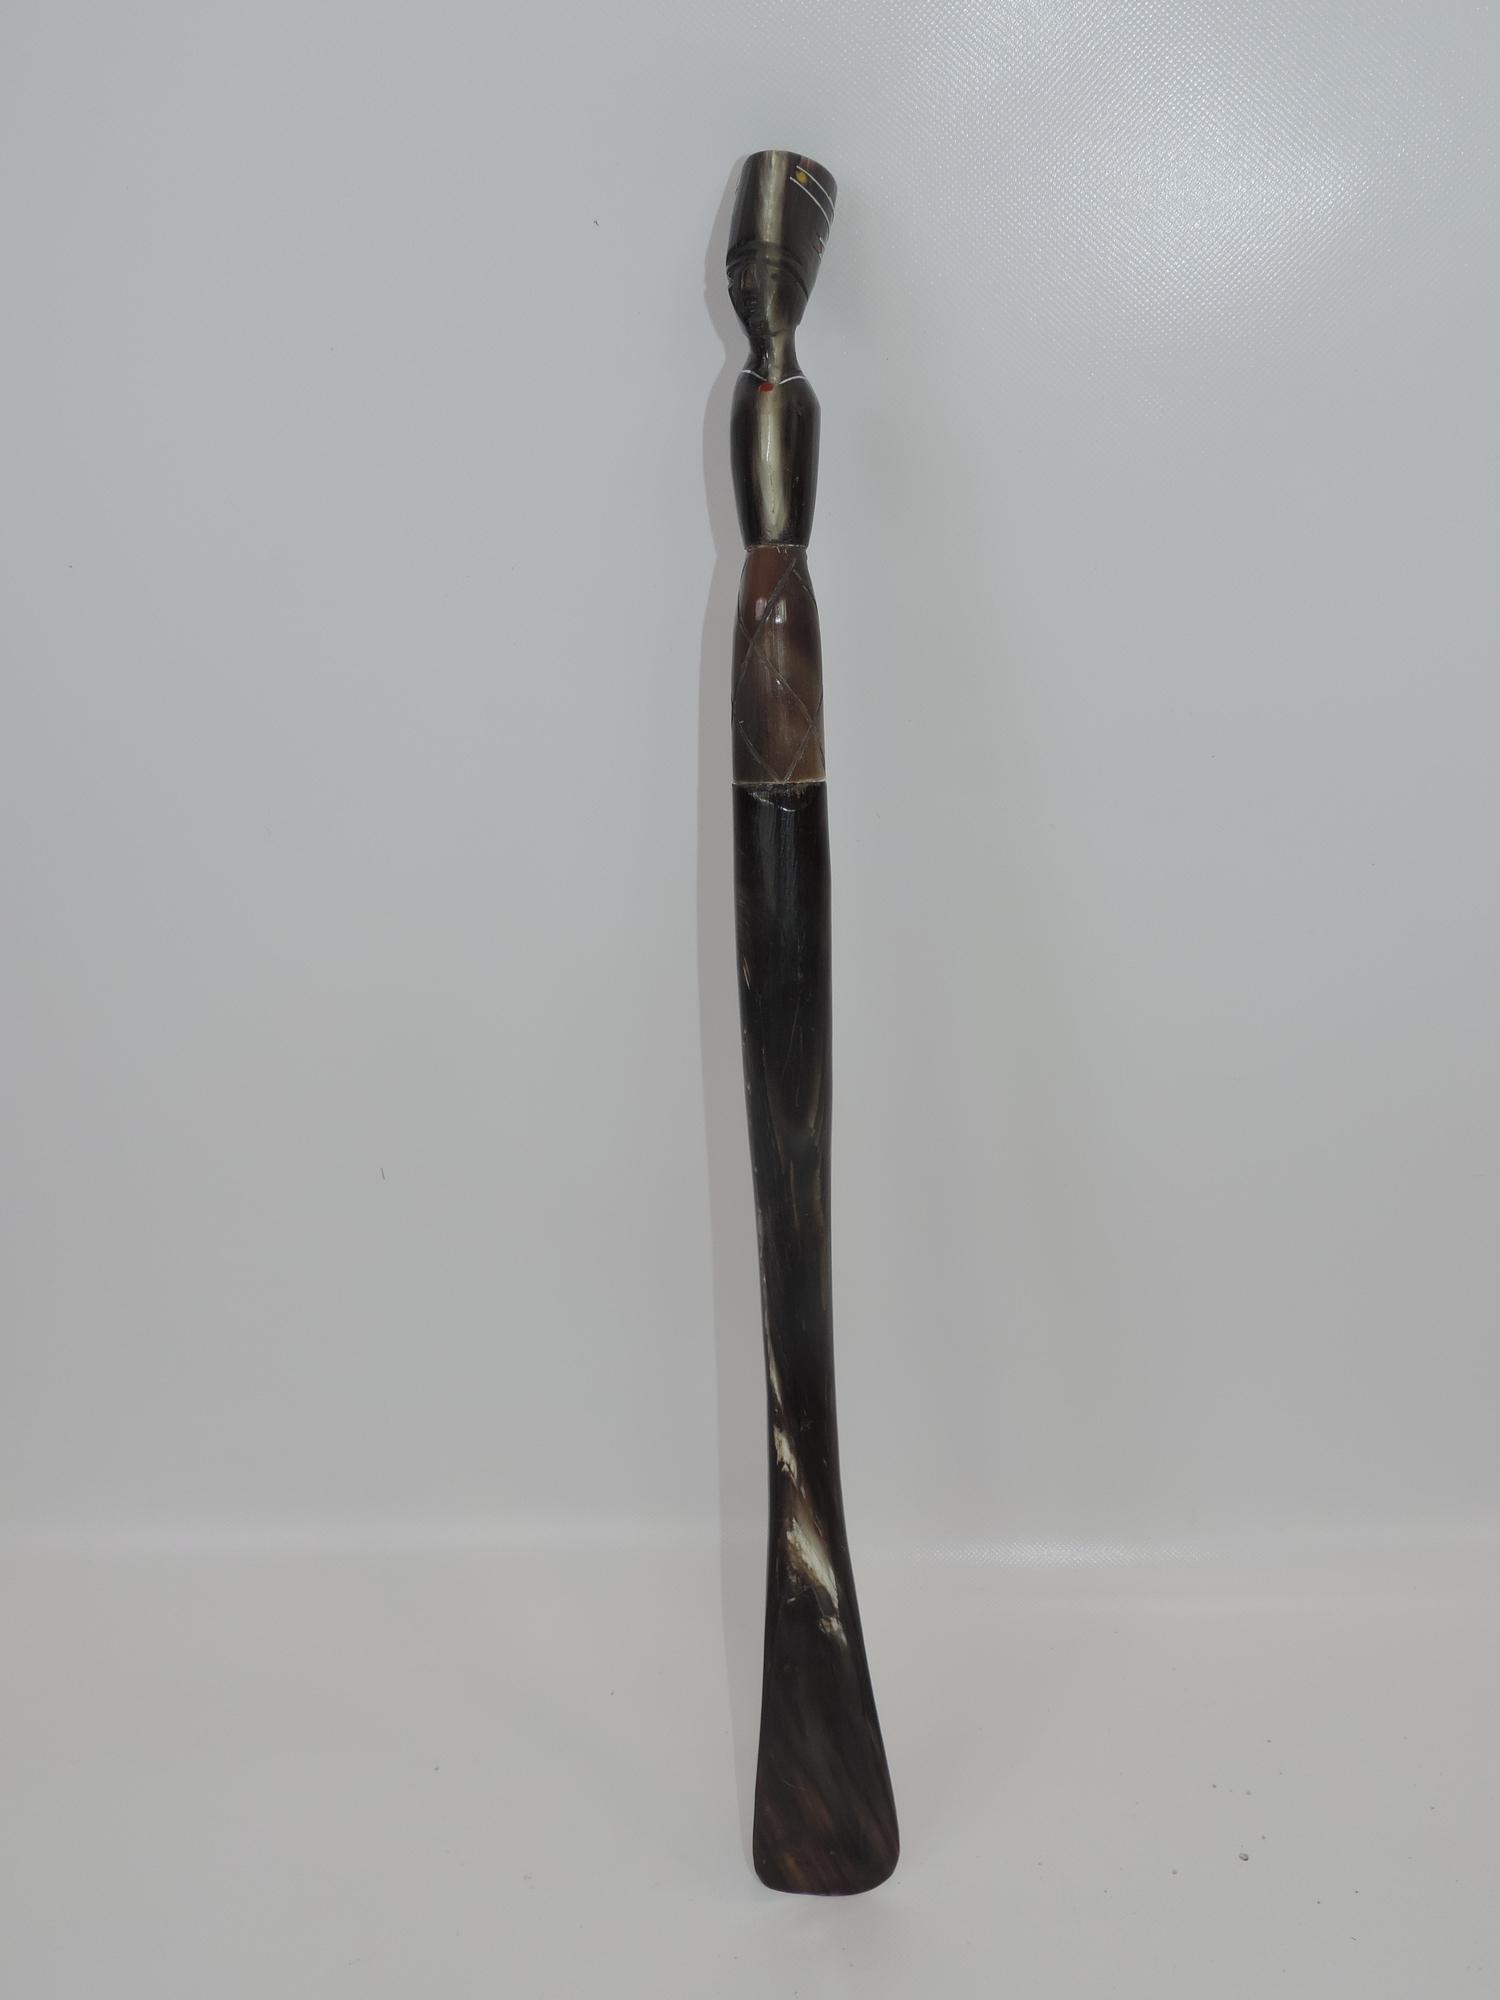 Carved Antelope Horn Shoe Horn with White Metal Mounts and Carved Head Handle